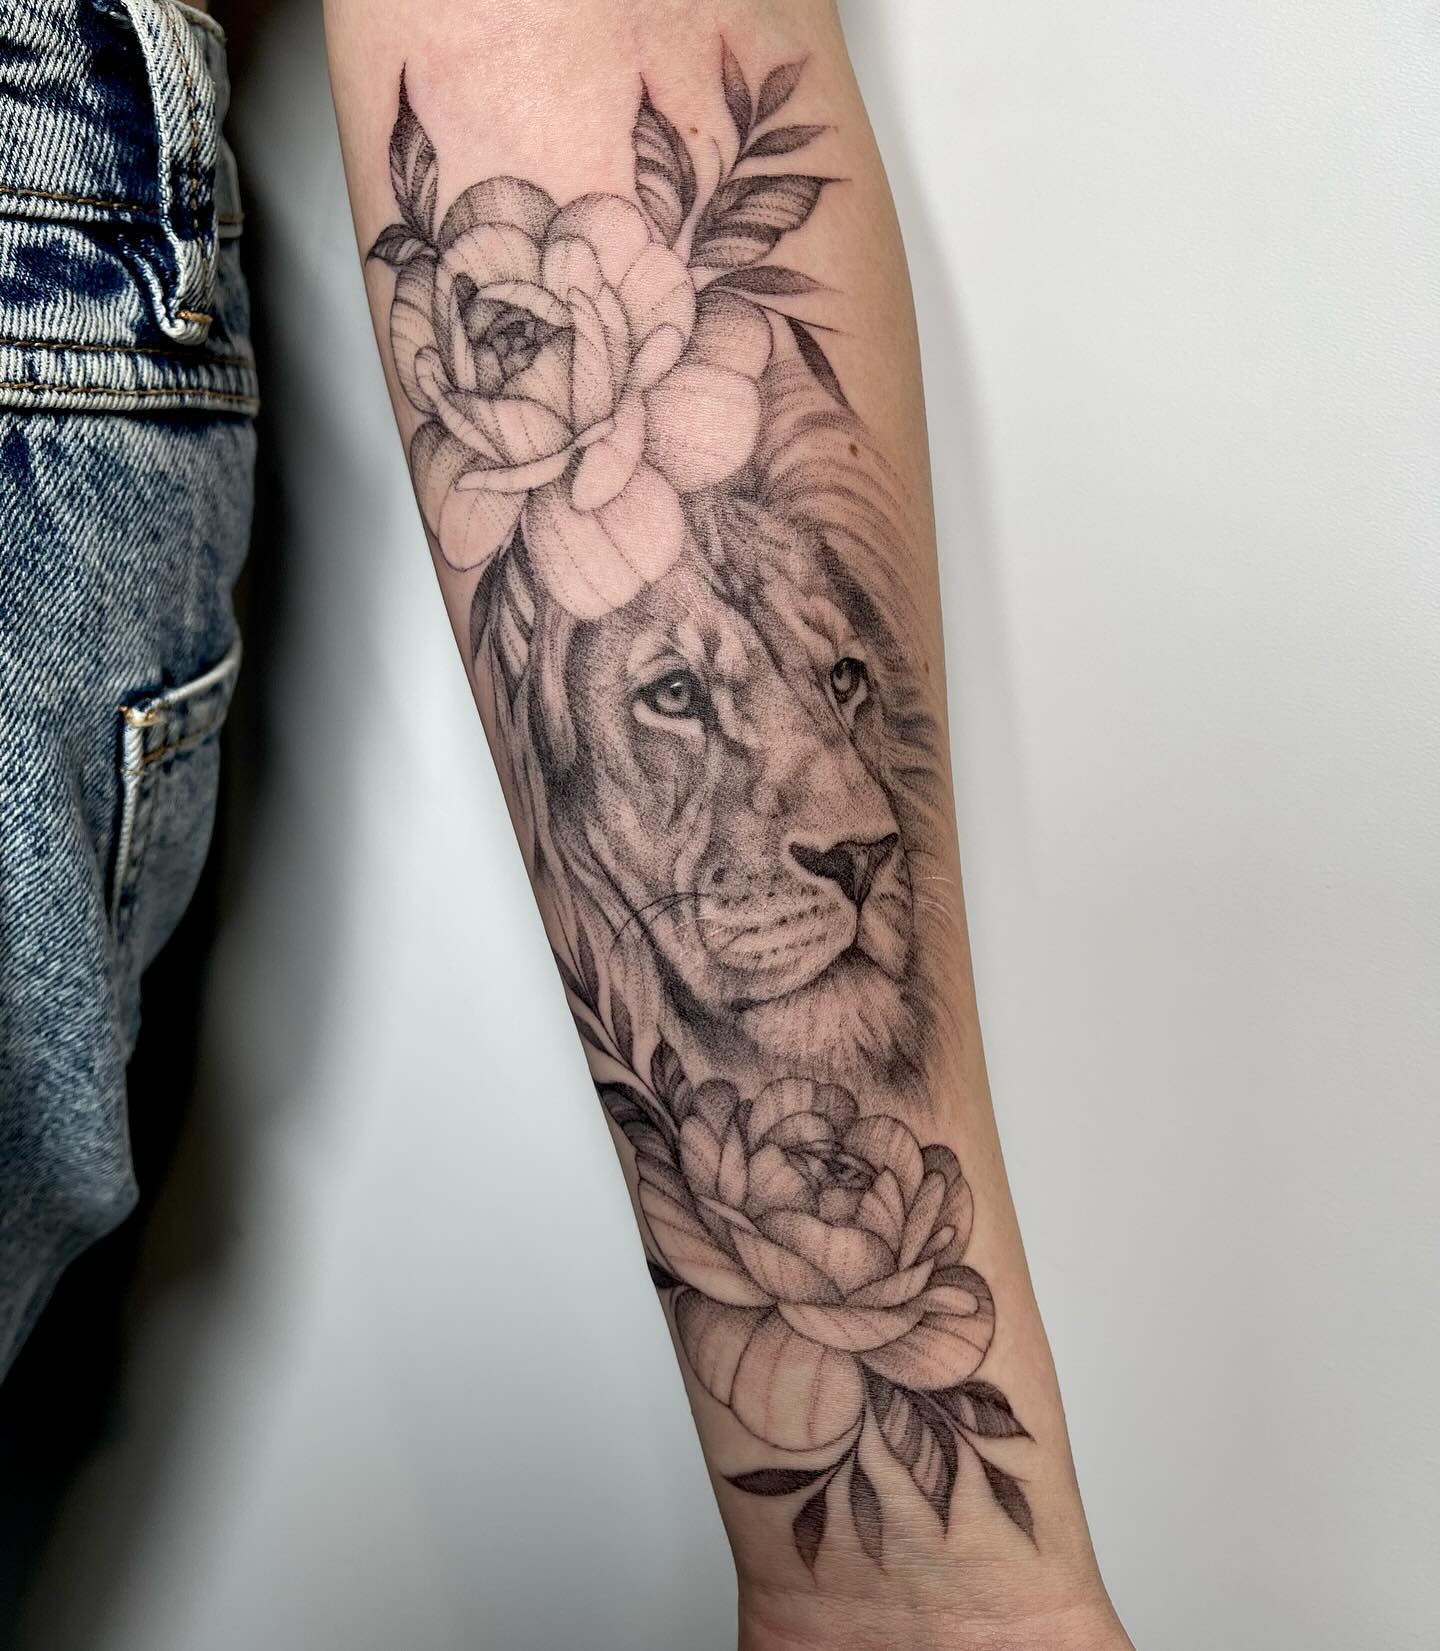 Black Lion Tattoo in Flowers on Arm